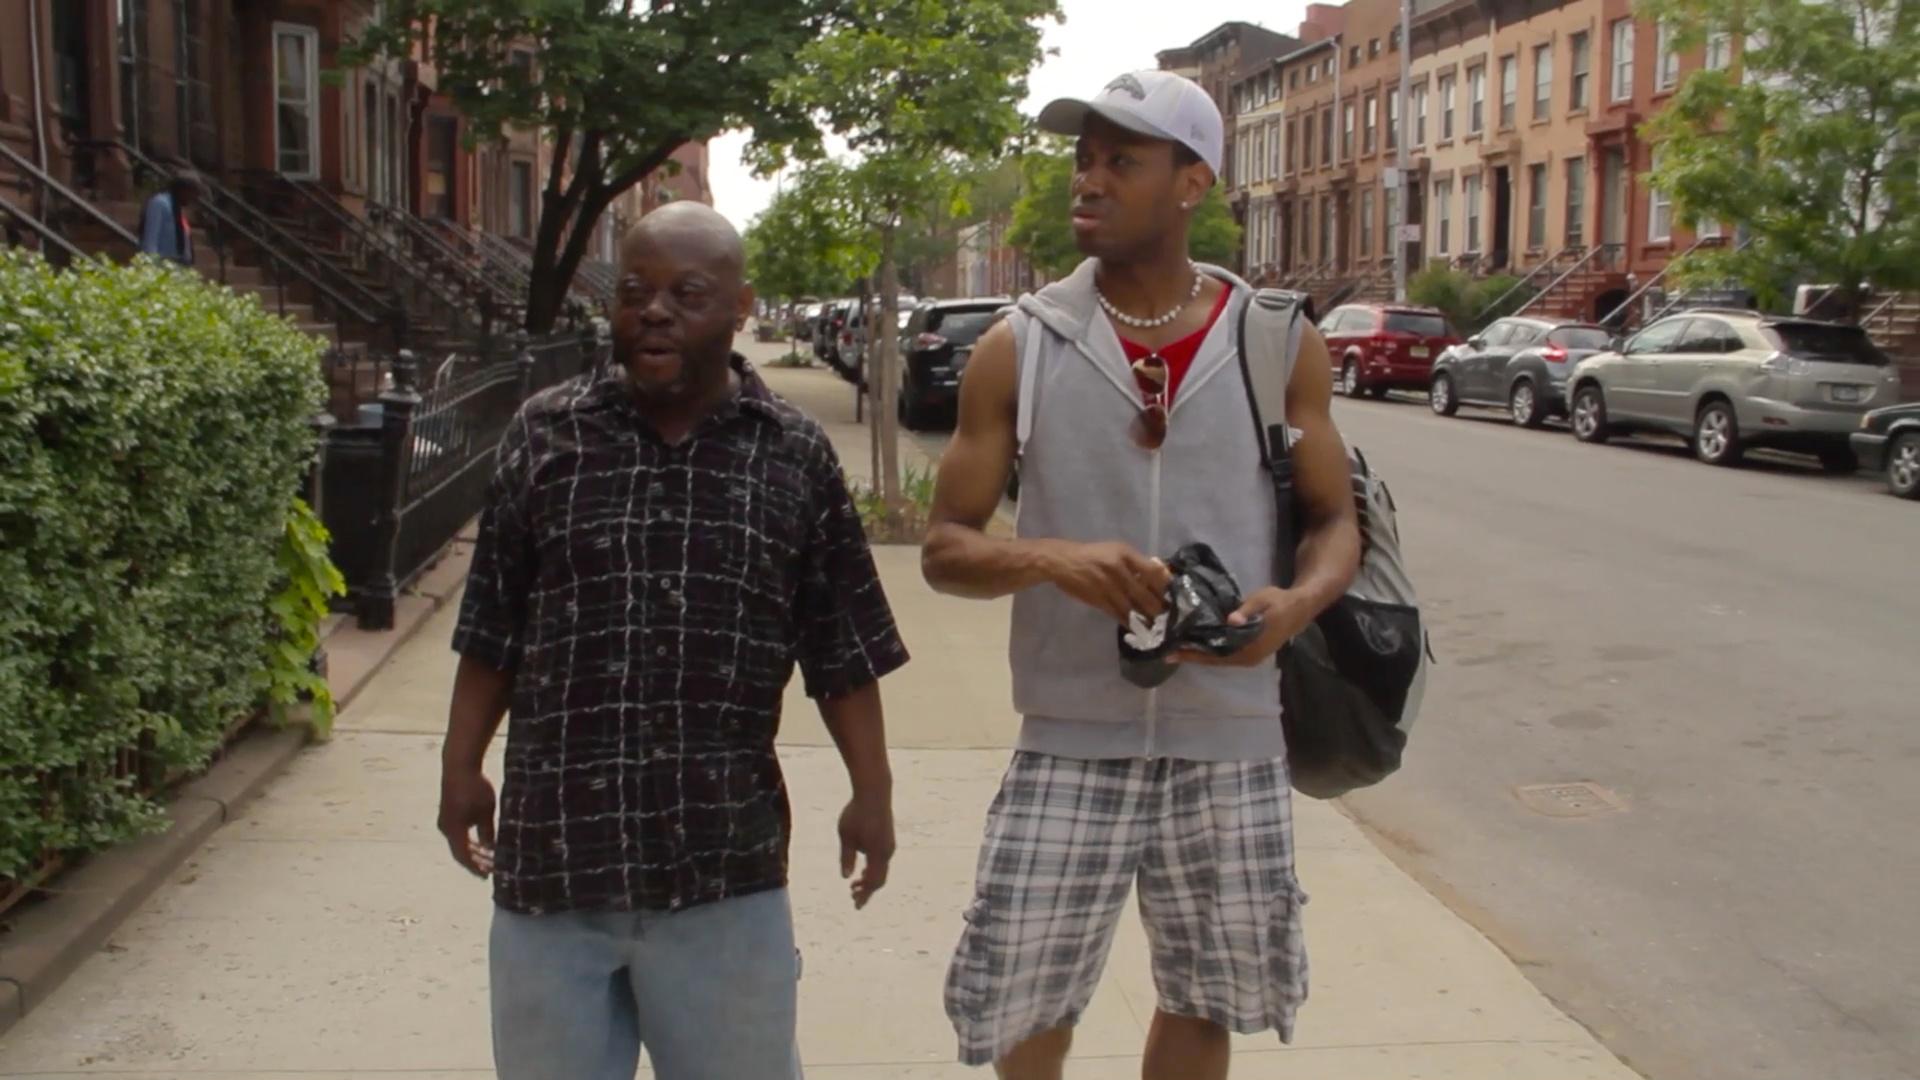 Fredrick Davis revisits the Brooklyn neighborhood where he spent his first four years with his dad.